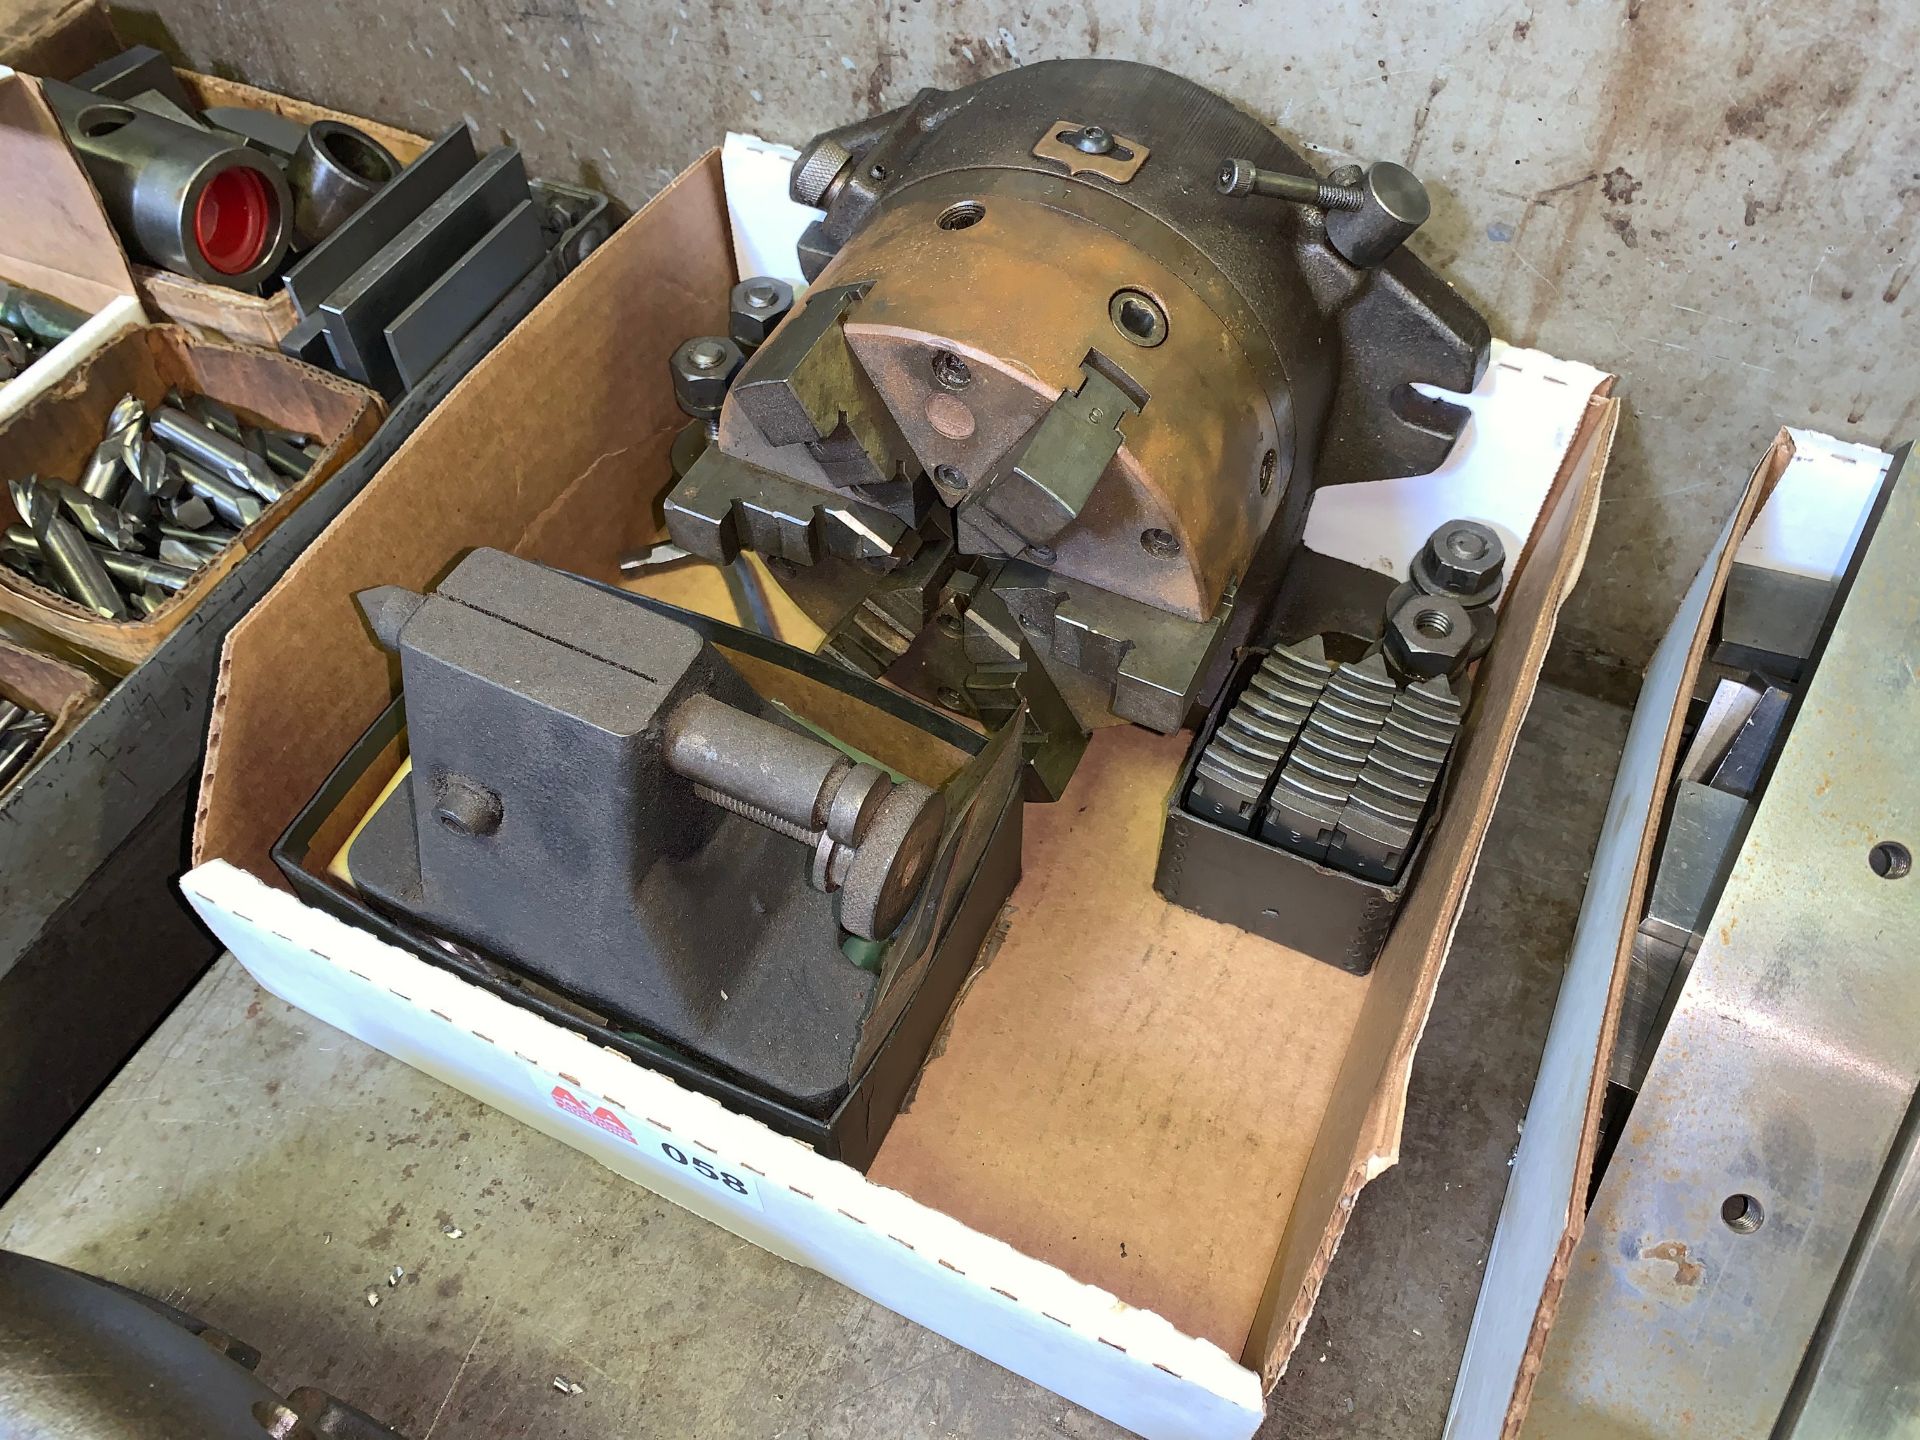 Rotary Horizontal and Vertical Indexing Head, 6"Diameter 4-Jaw Chuck, Center and Tooling (Located in